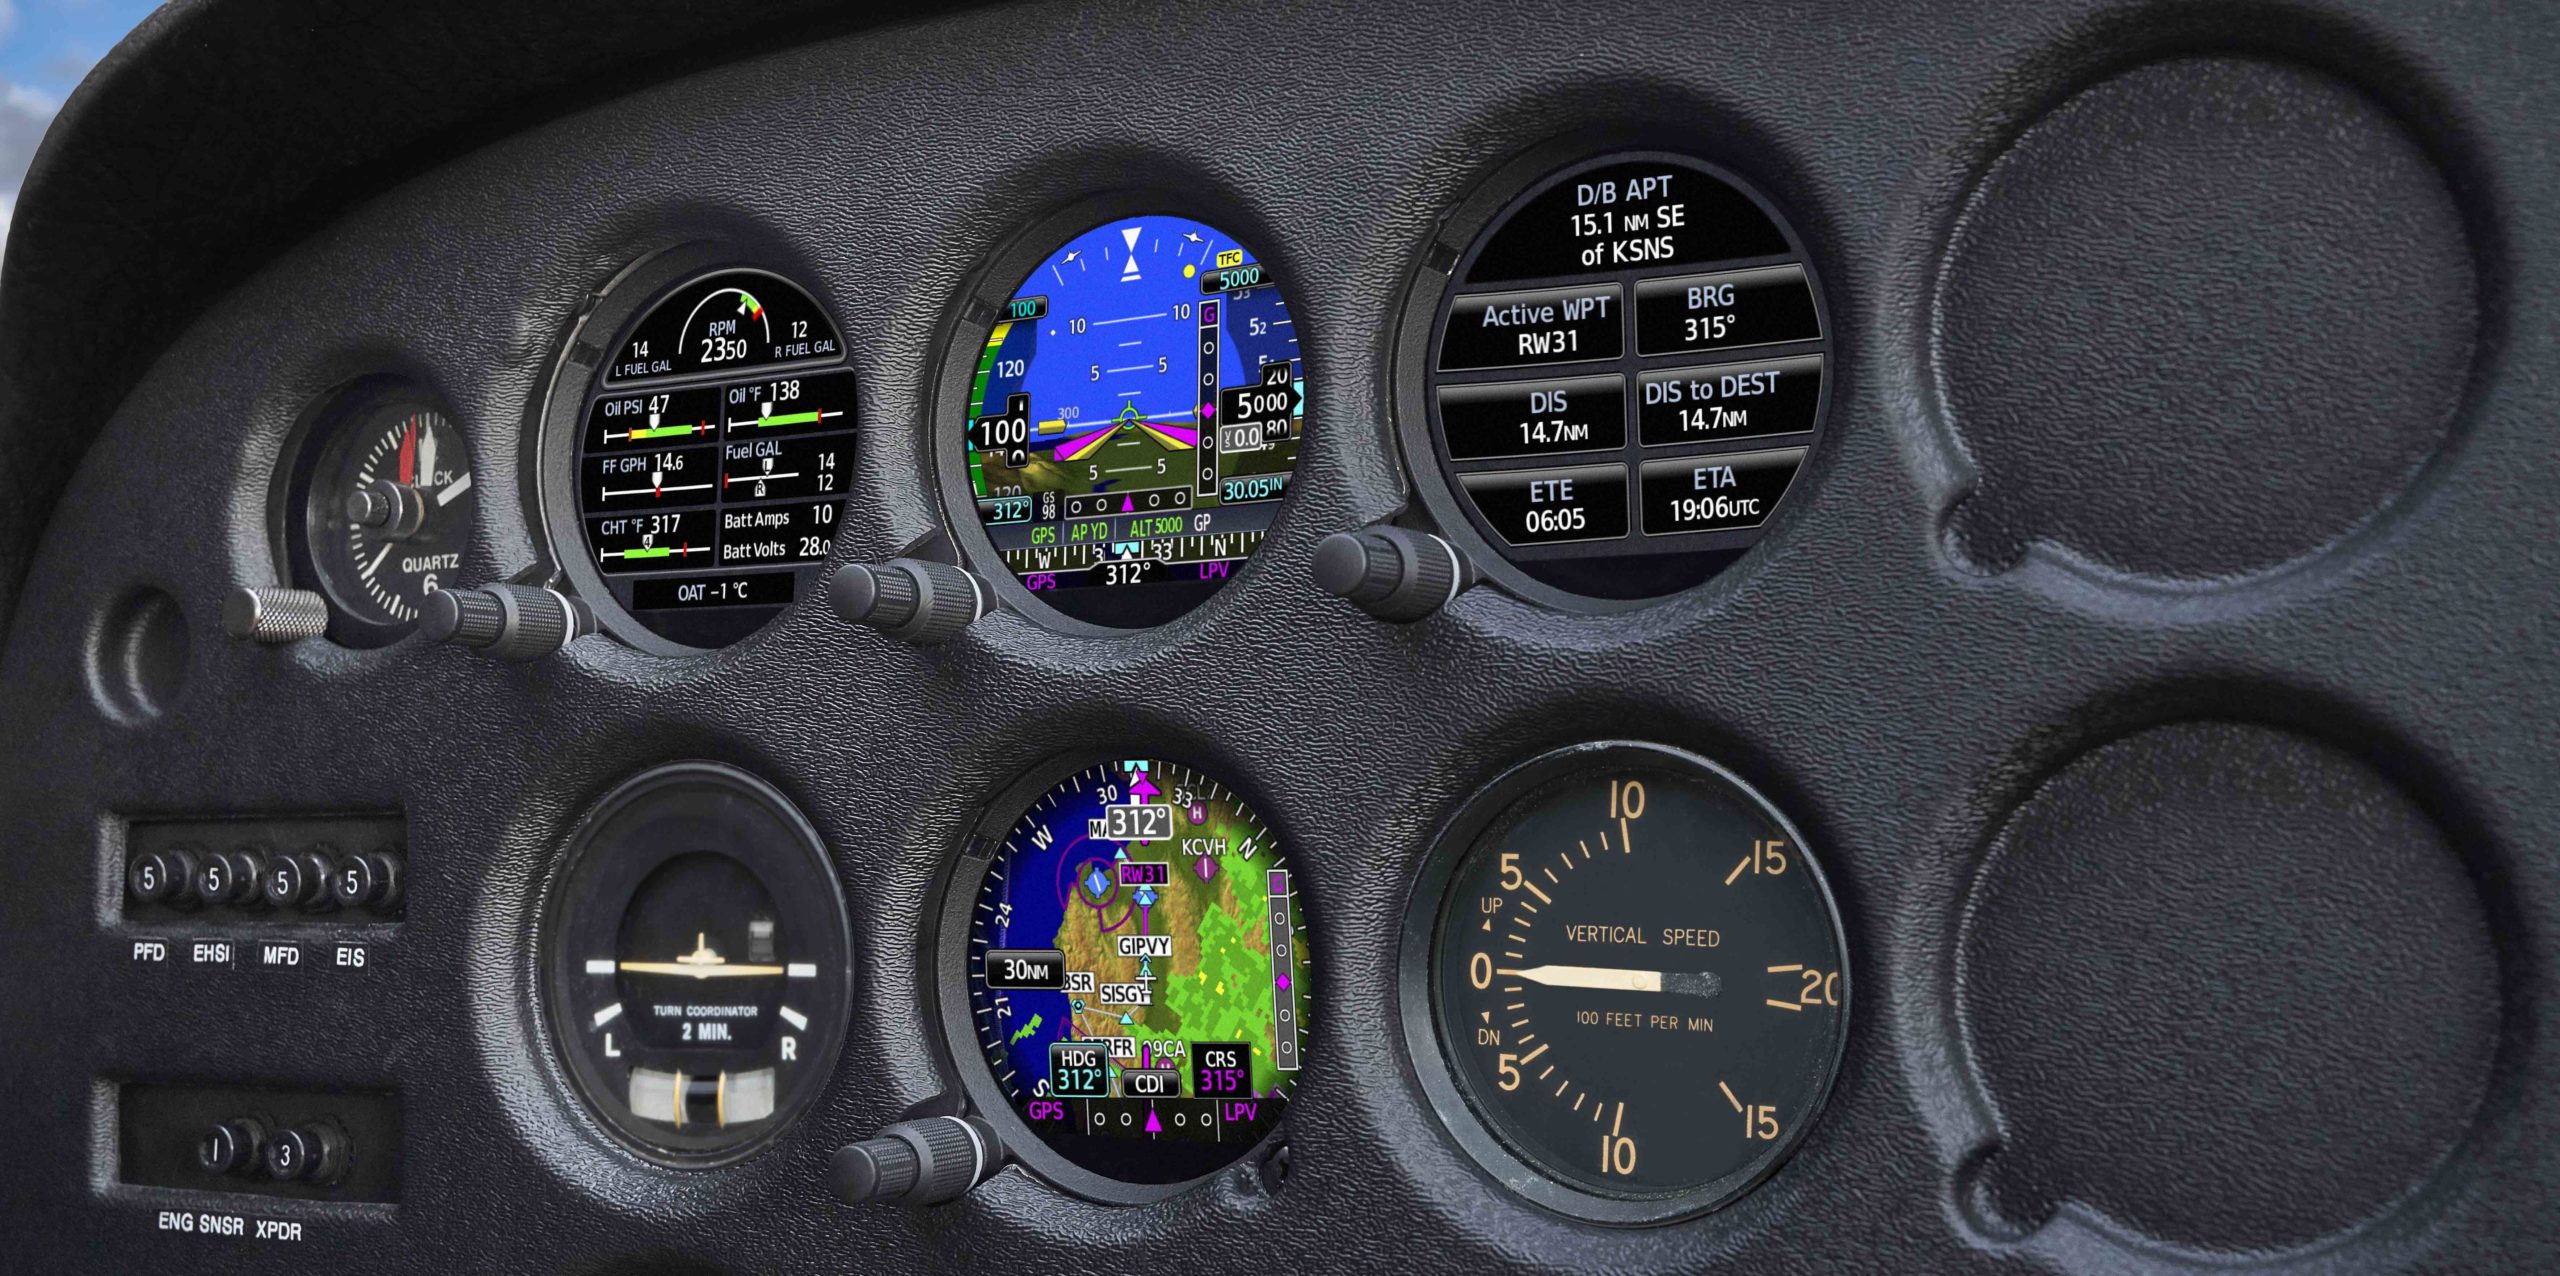 Aircraft instrument panel featuring GI 275 electronic flight instruments